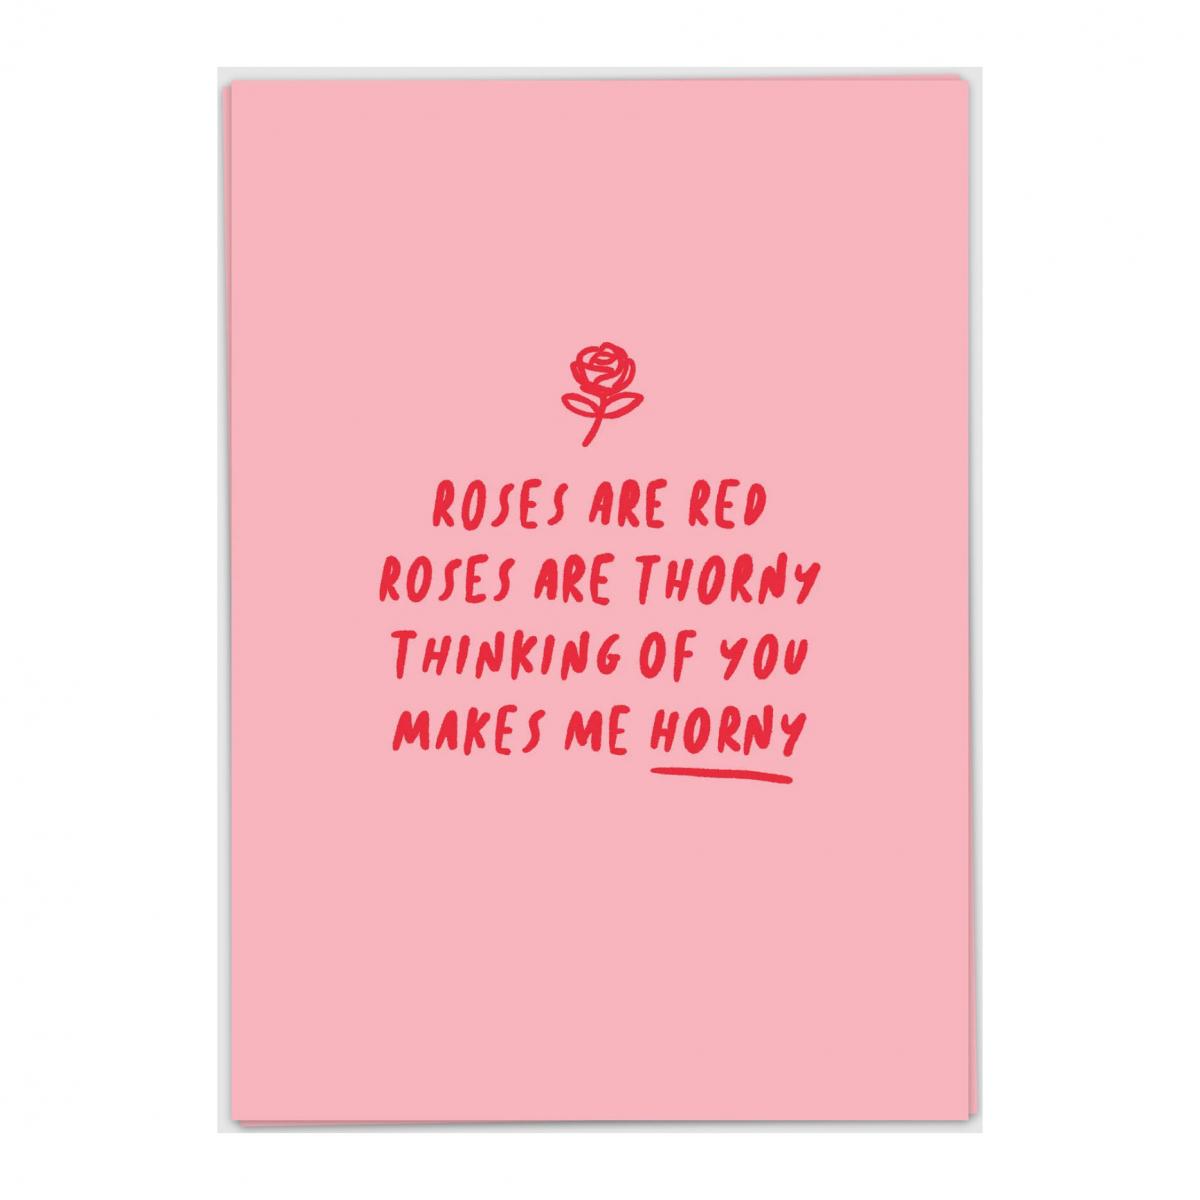 'Roses are red'